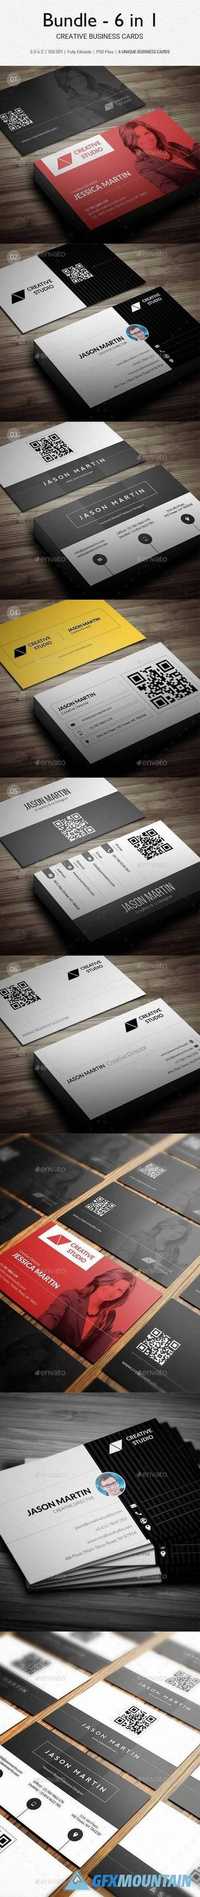 Bundle - 6 in 1 - Creative Business Cards - B29 20465912